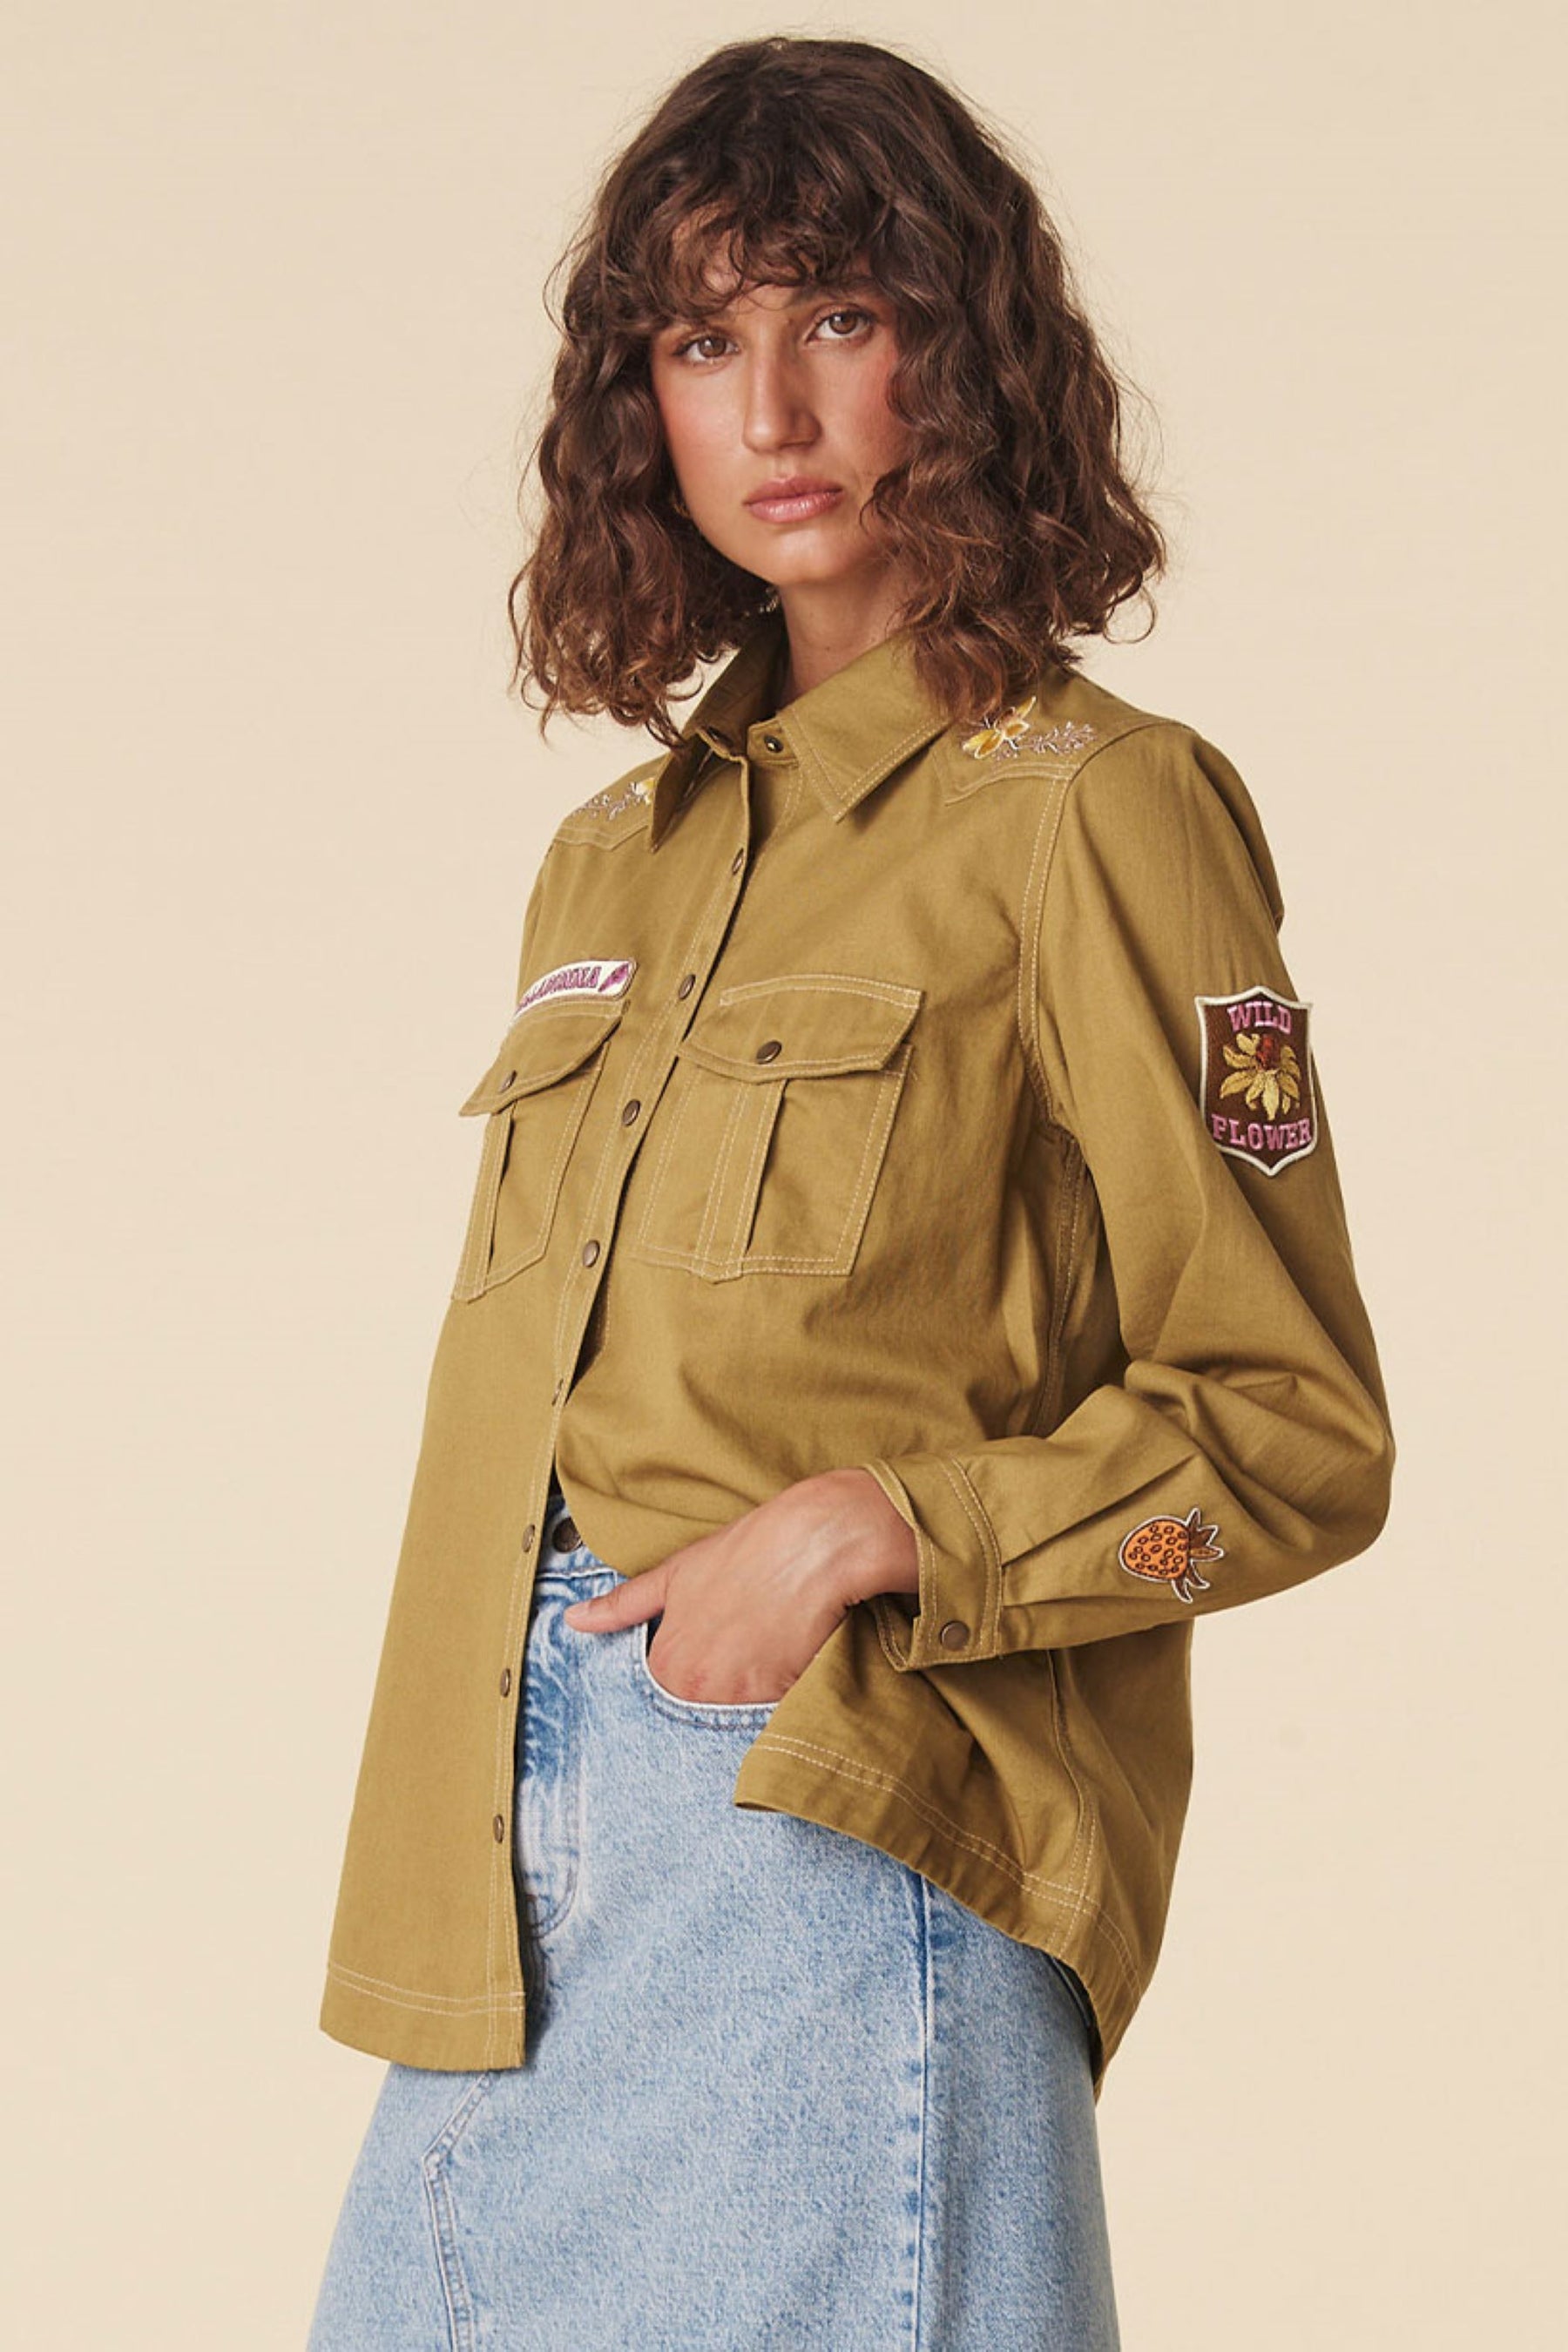 Foxglove Embroidered Shirt - Olive